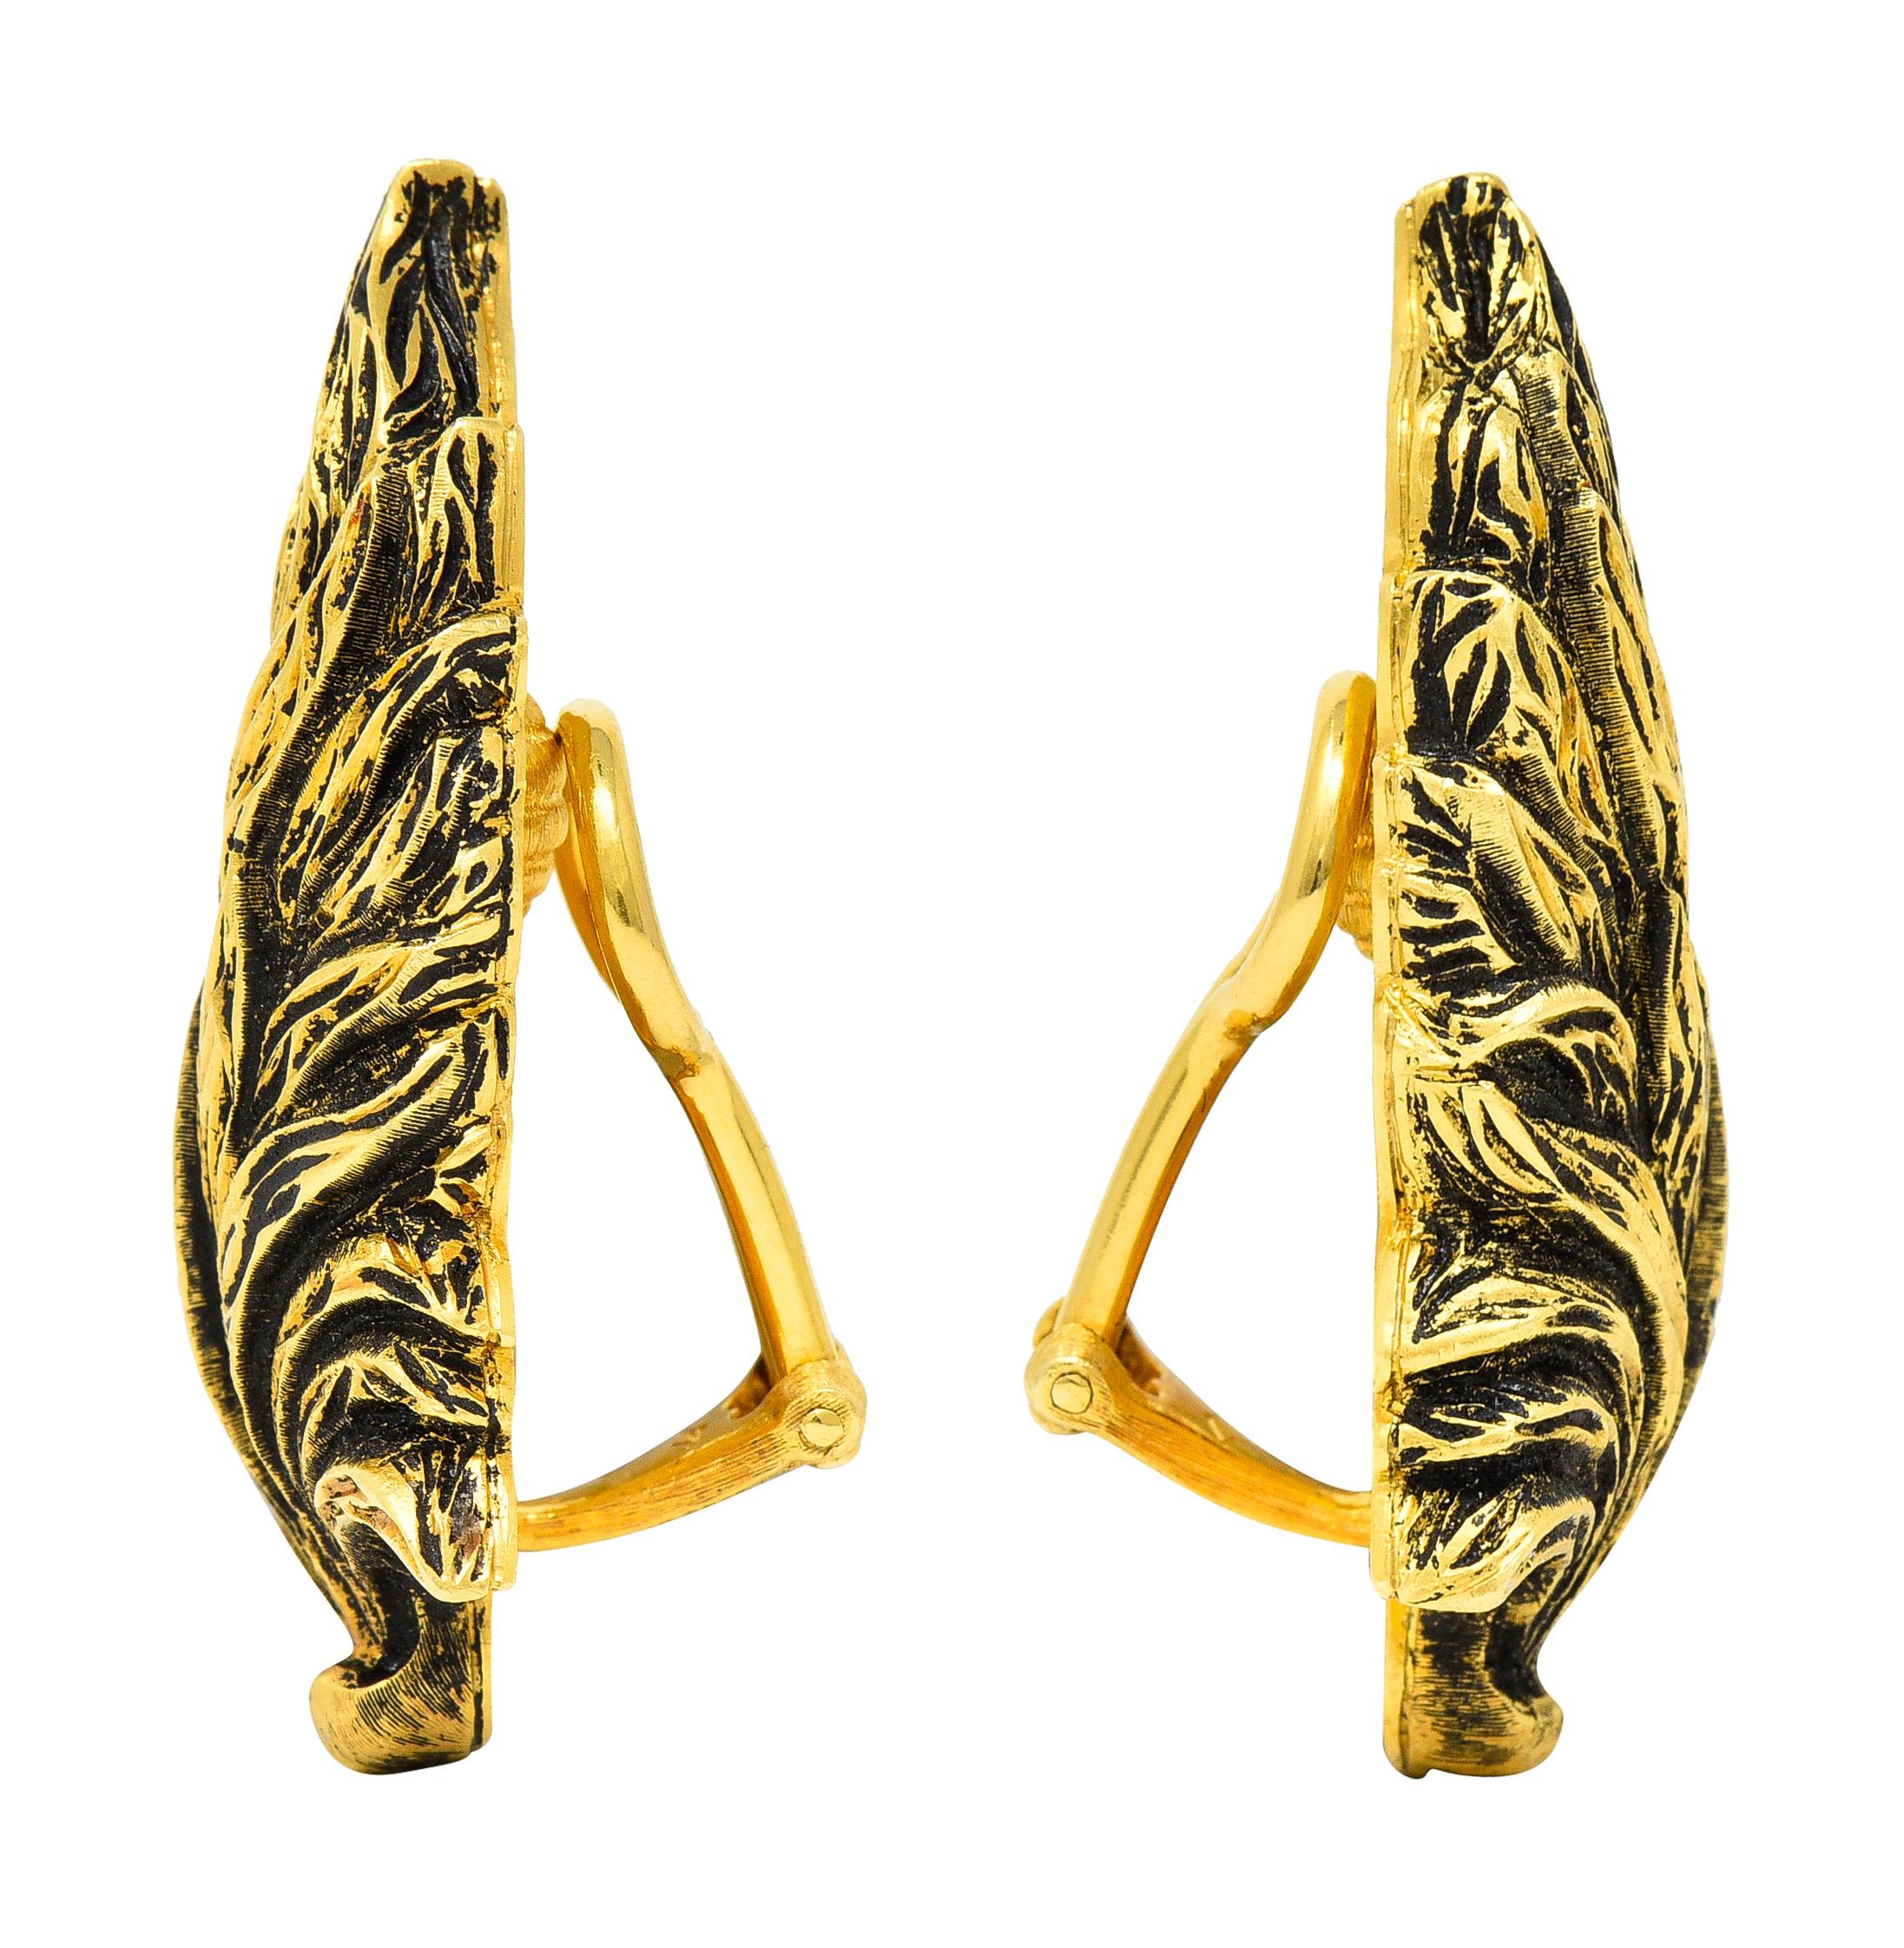 Lightweight puffed gold forms are highly texturous and rendered as feathers. With a high contrasting oxidized finish accentuating details. Completed by hinged omega backs. Inscribed K18 for 18 karat gold. Numbered and fully signed Buccellati Italy.